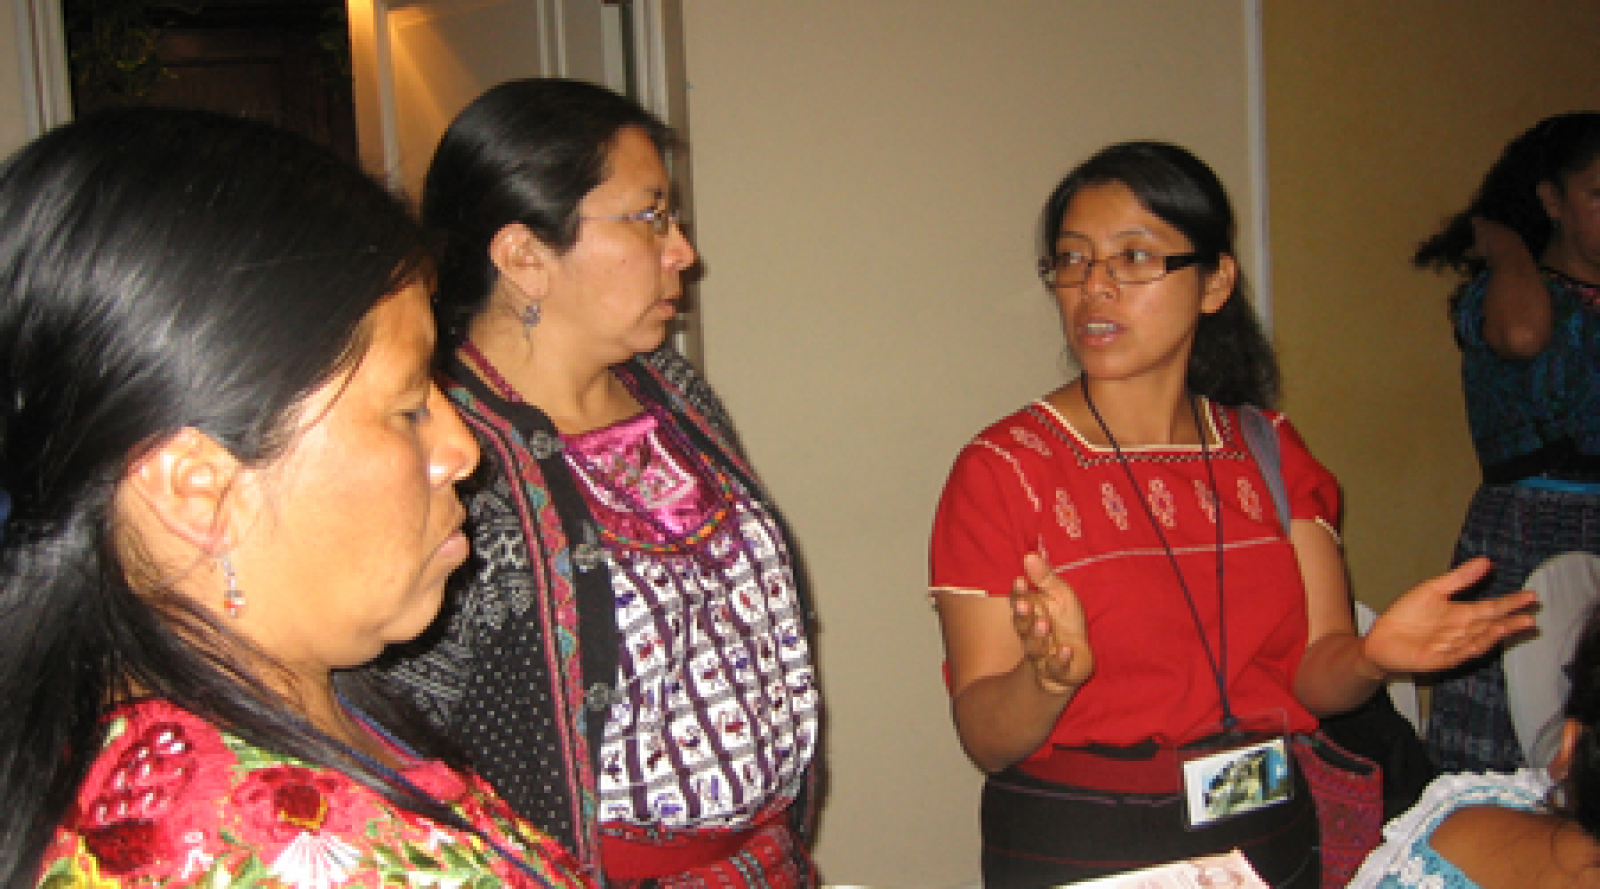 New Report Examines the Reality of Women’s Participation in Guatemalan Politics